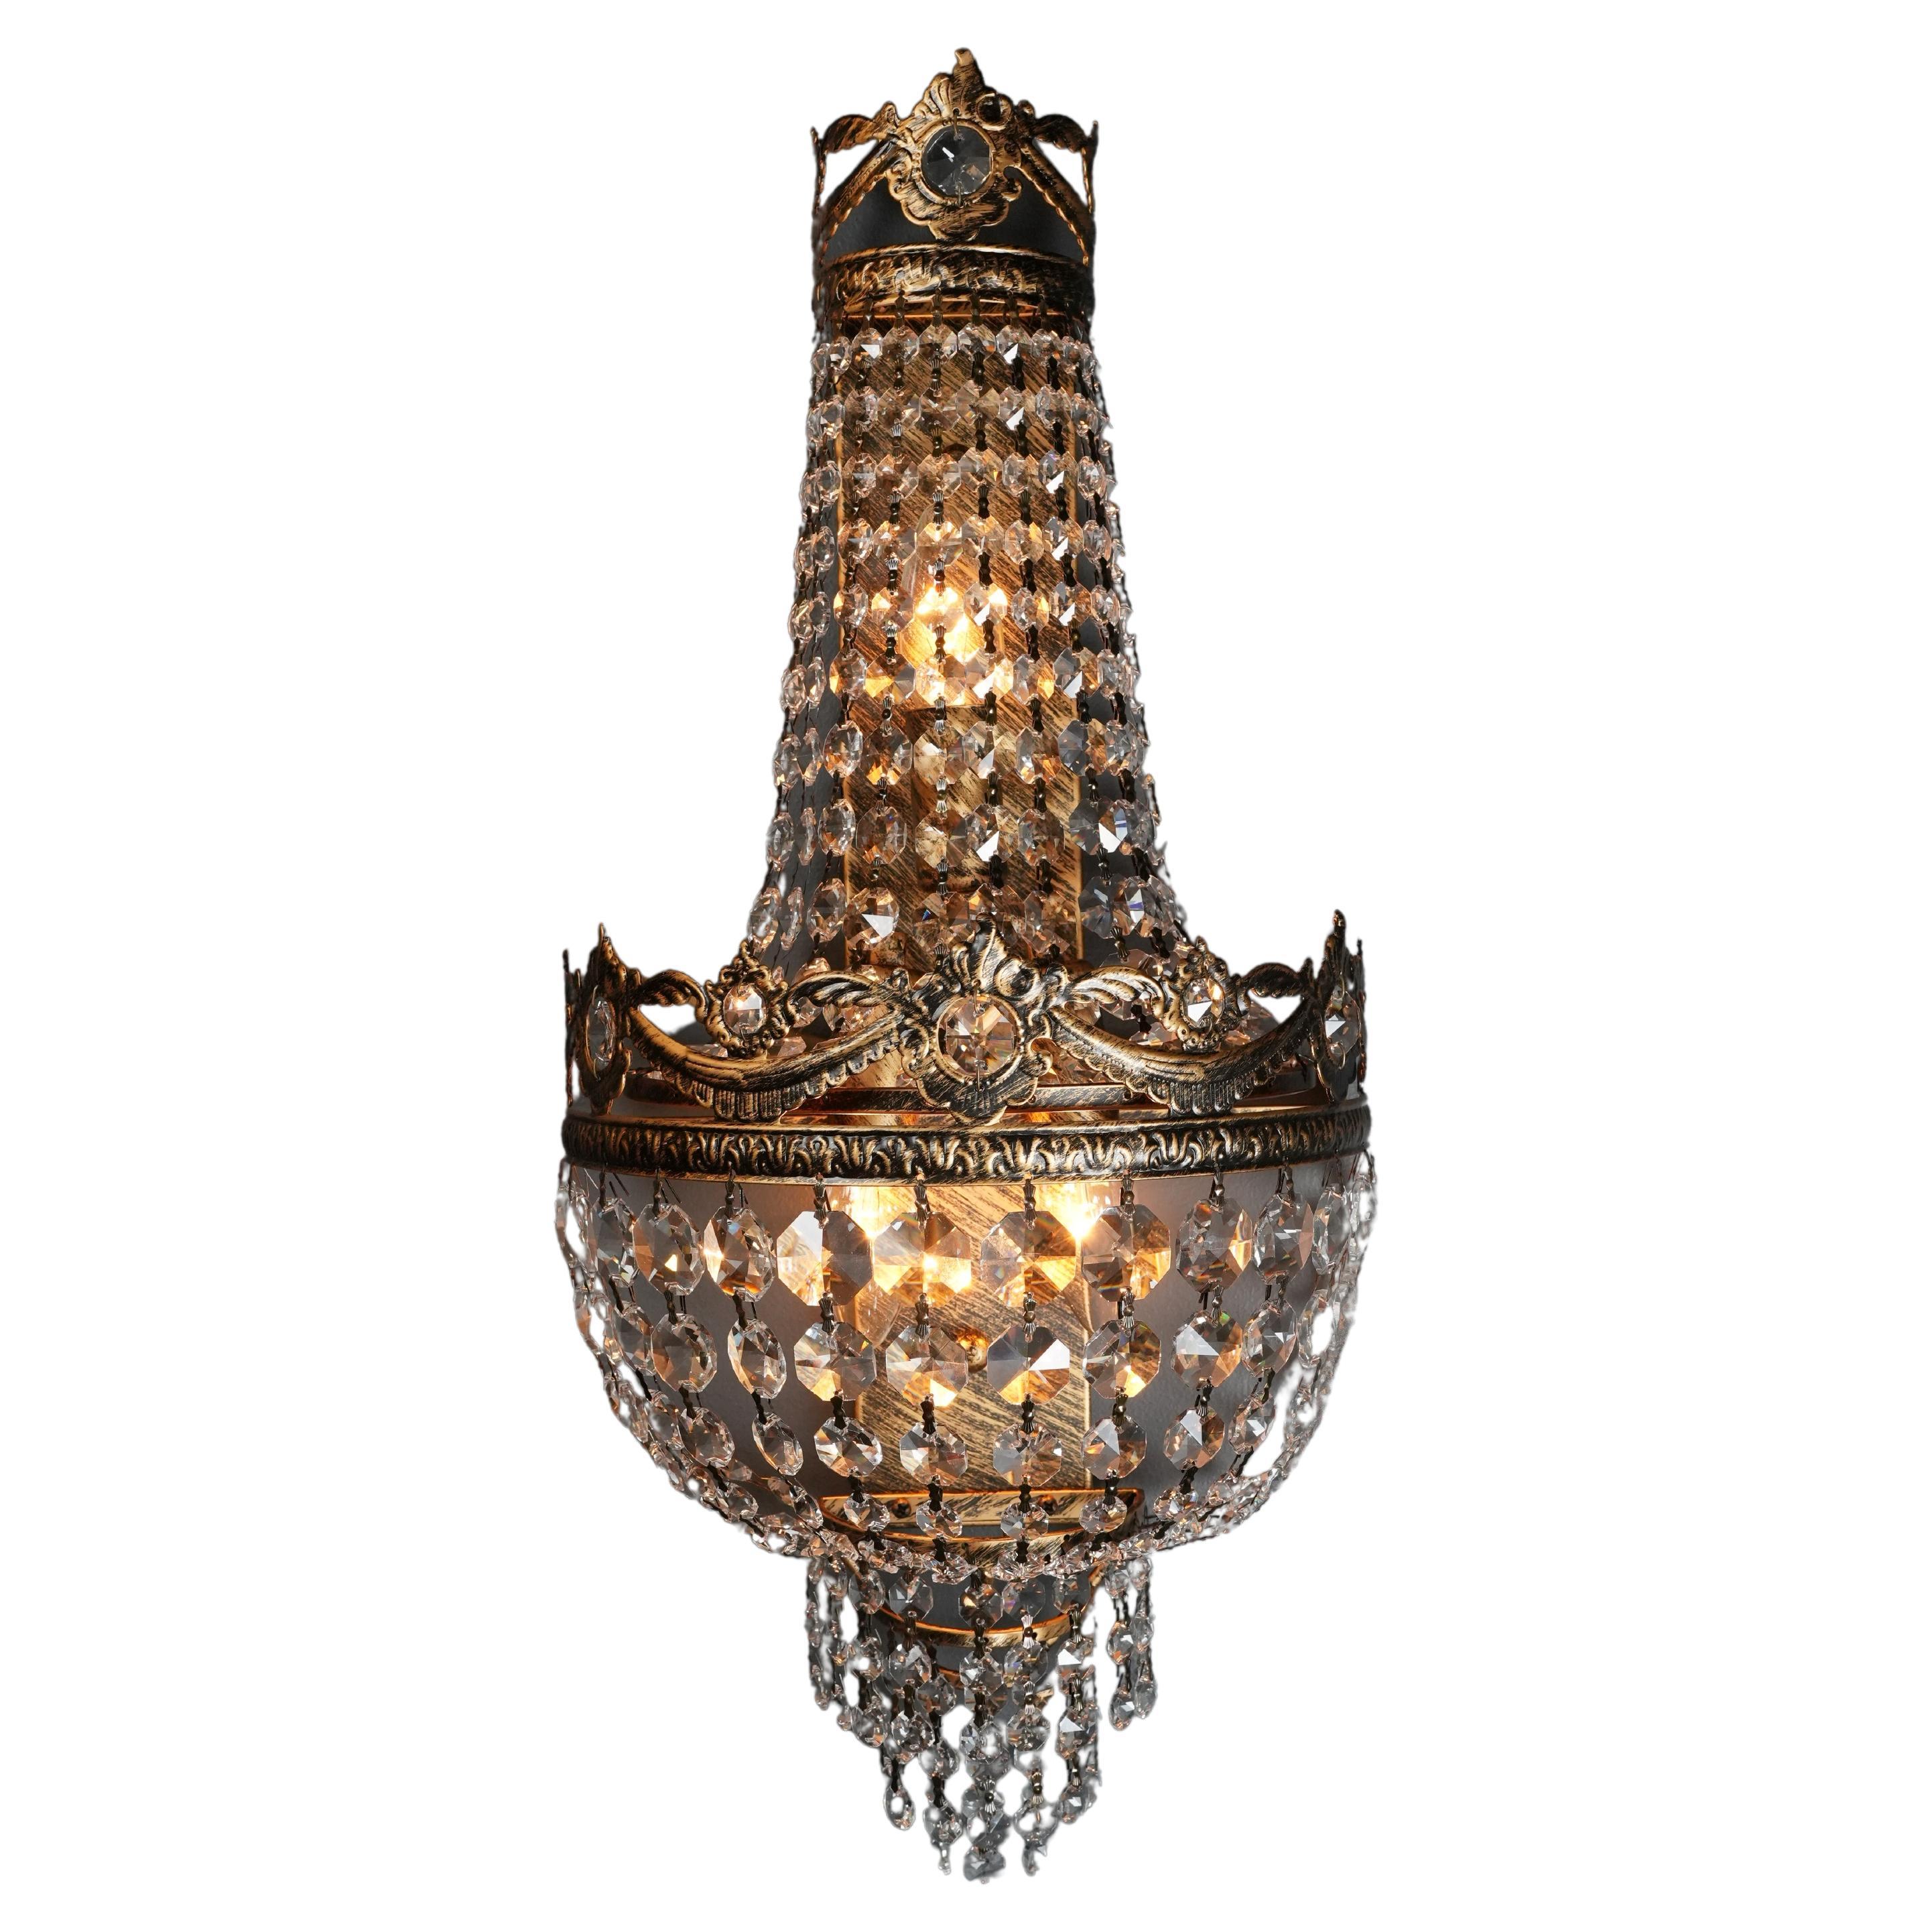 Antique Style Wall Lamp Art Deco Art Nouveau Classic Decoration With Crystals For Sale